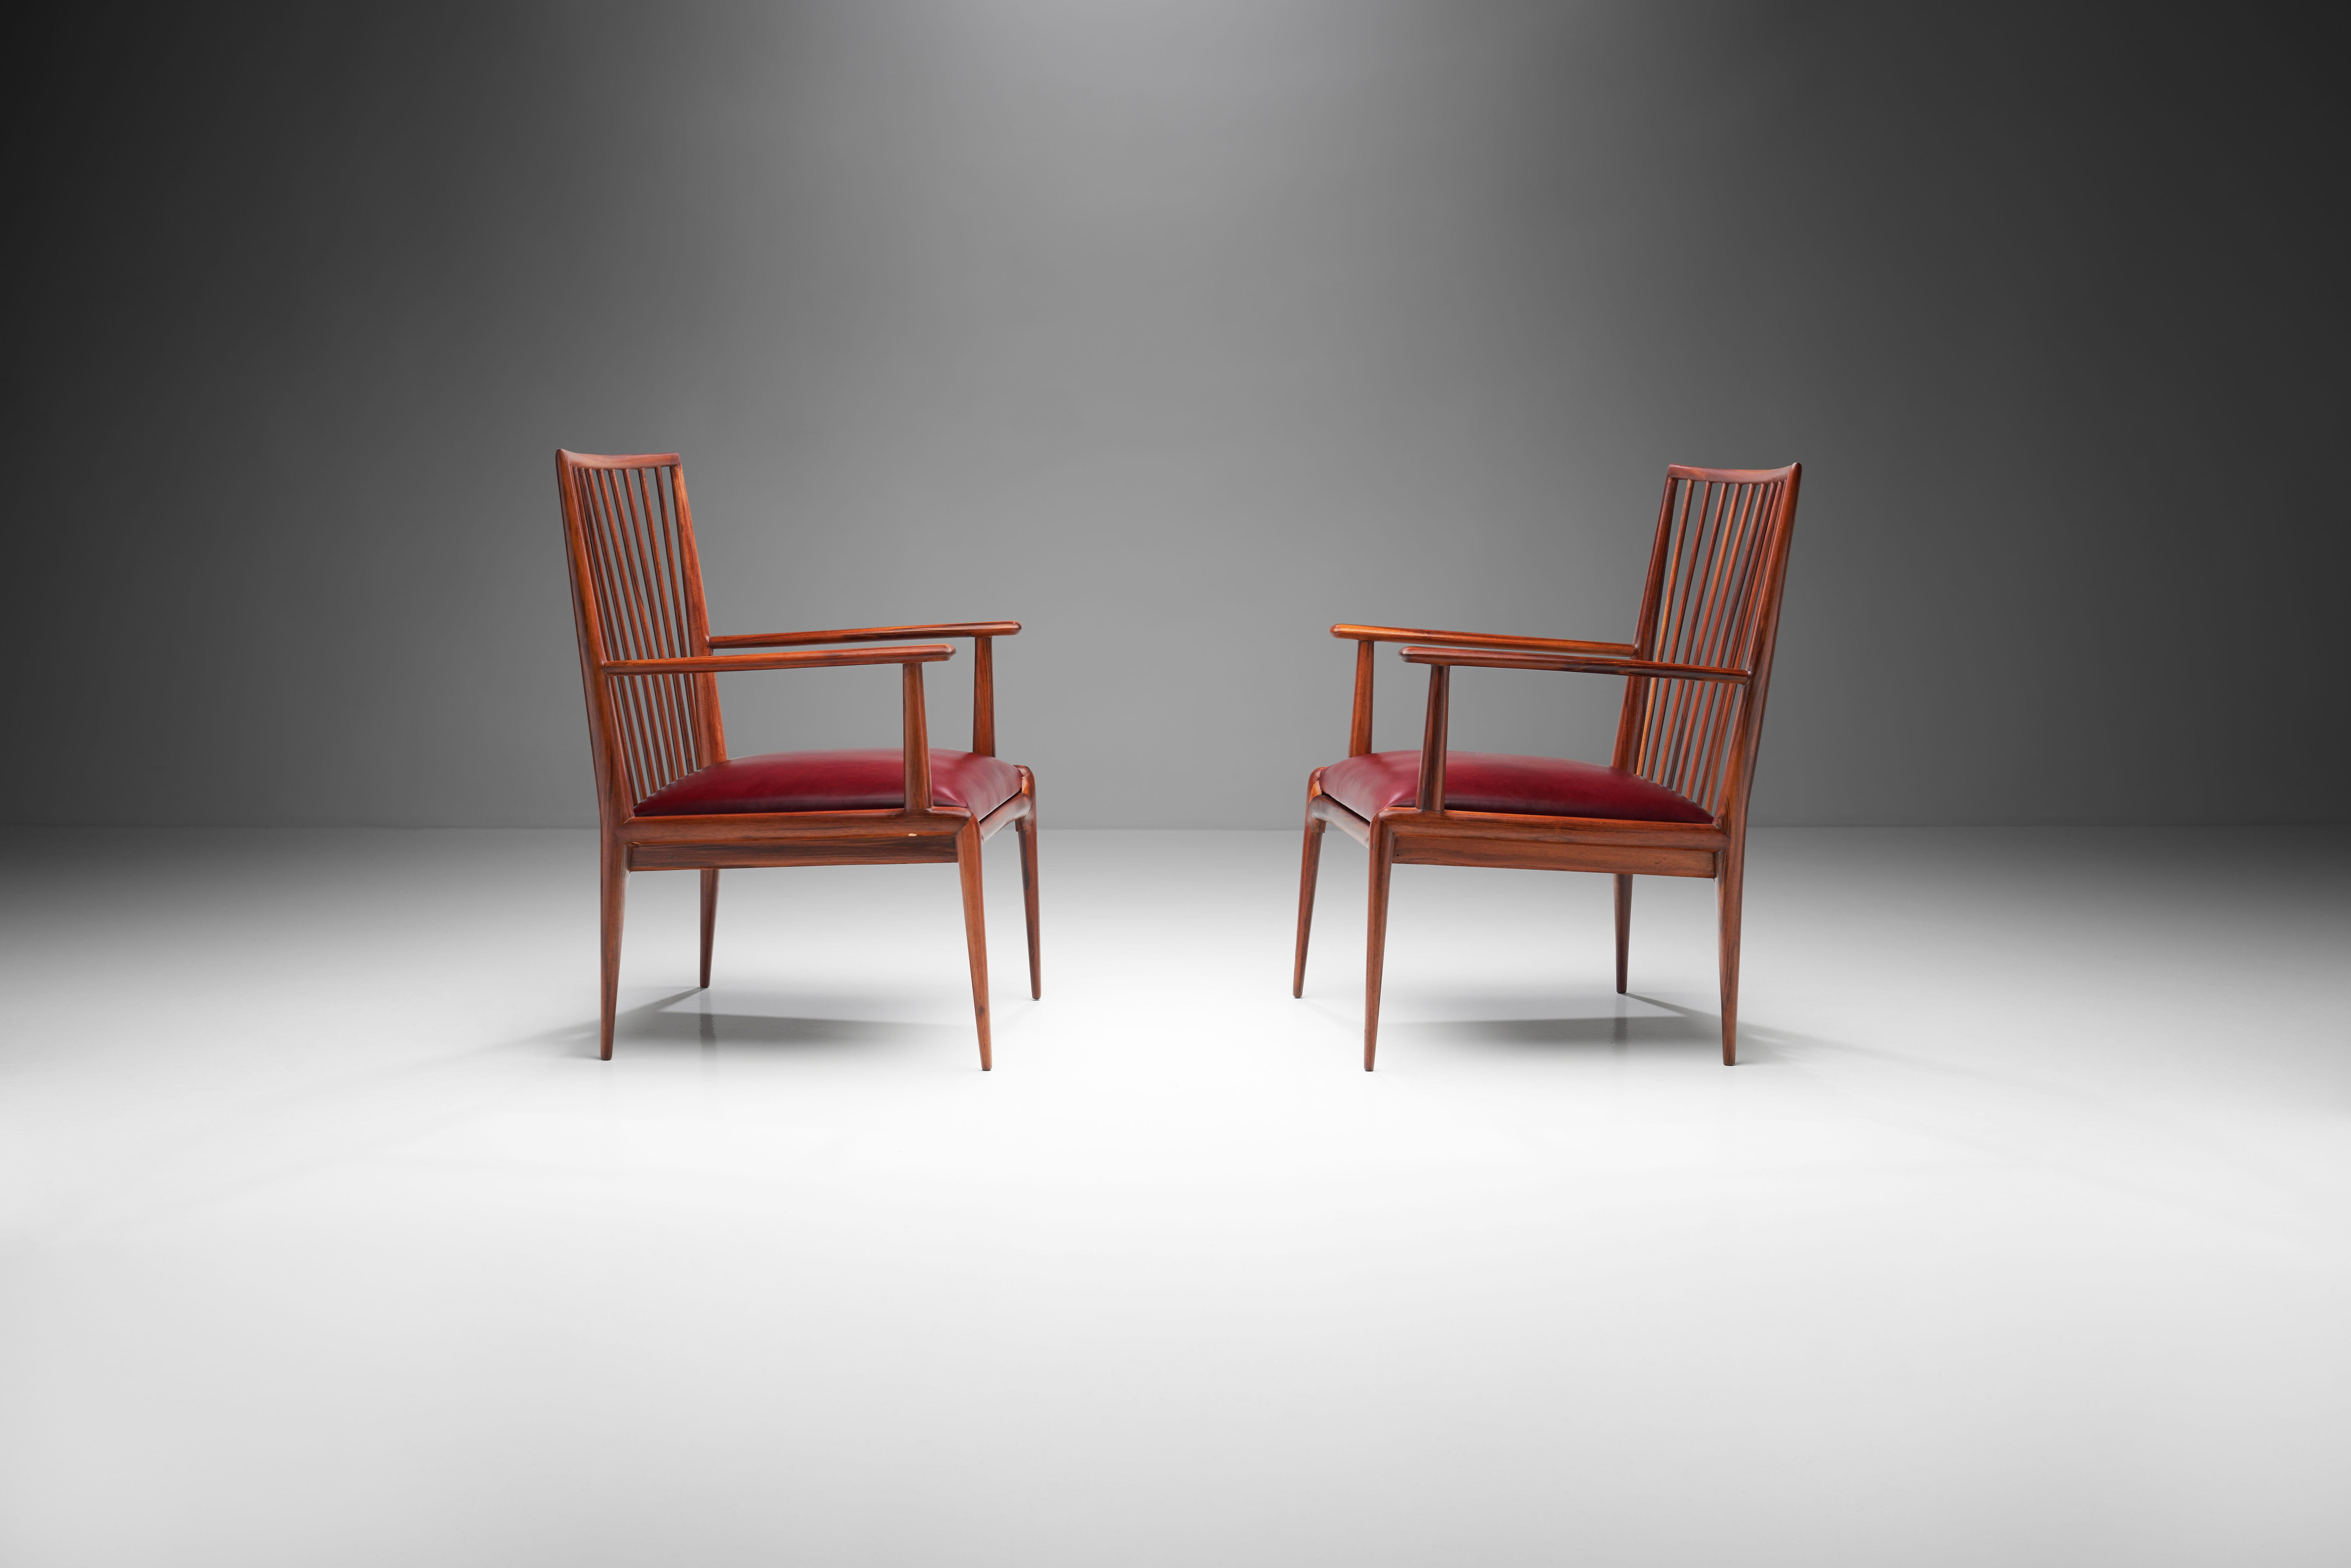 Brazilian Pair of Mid-Century Chairs by Branco & Preto 'Attr.', Brazil, 1950s For Sale